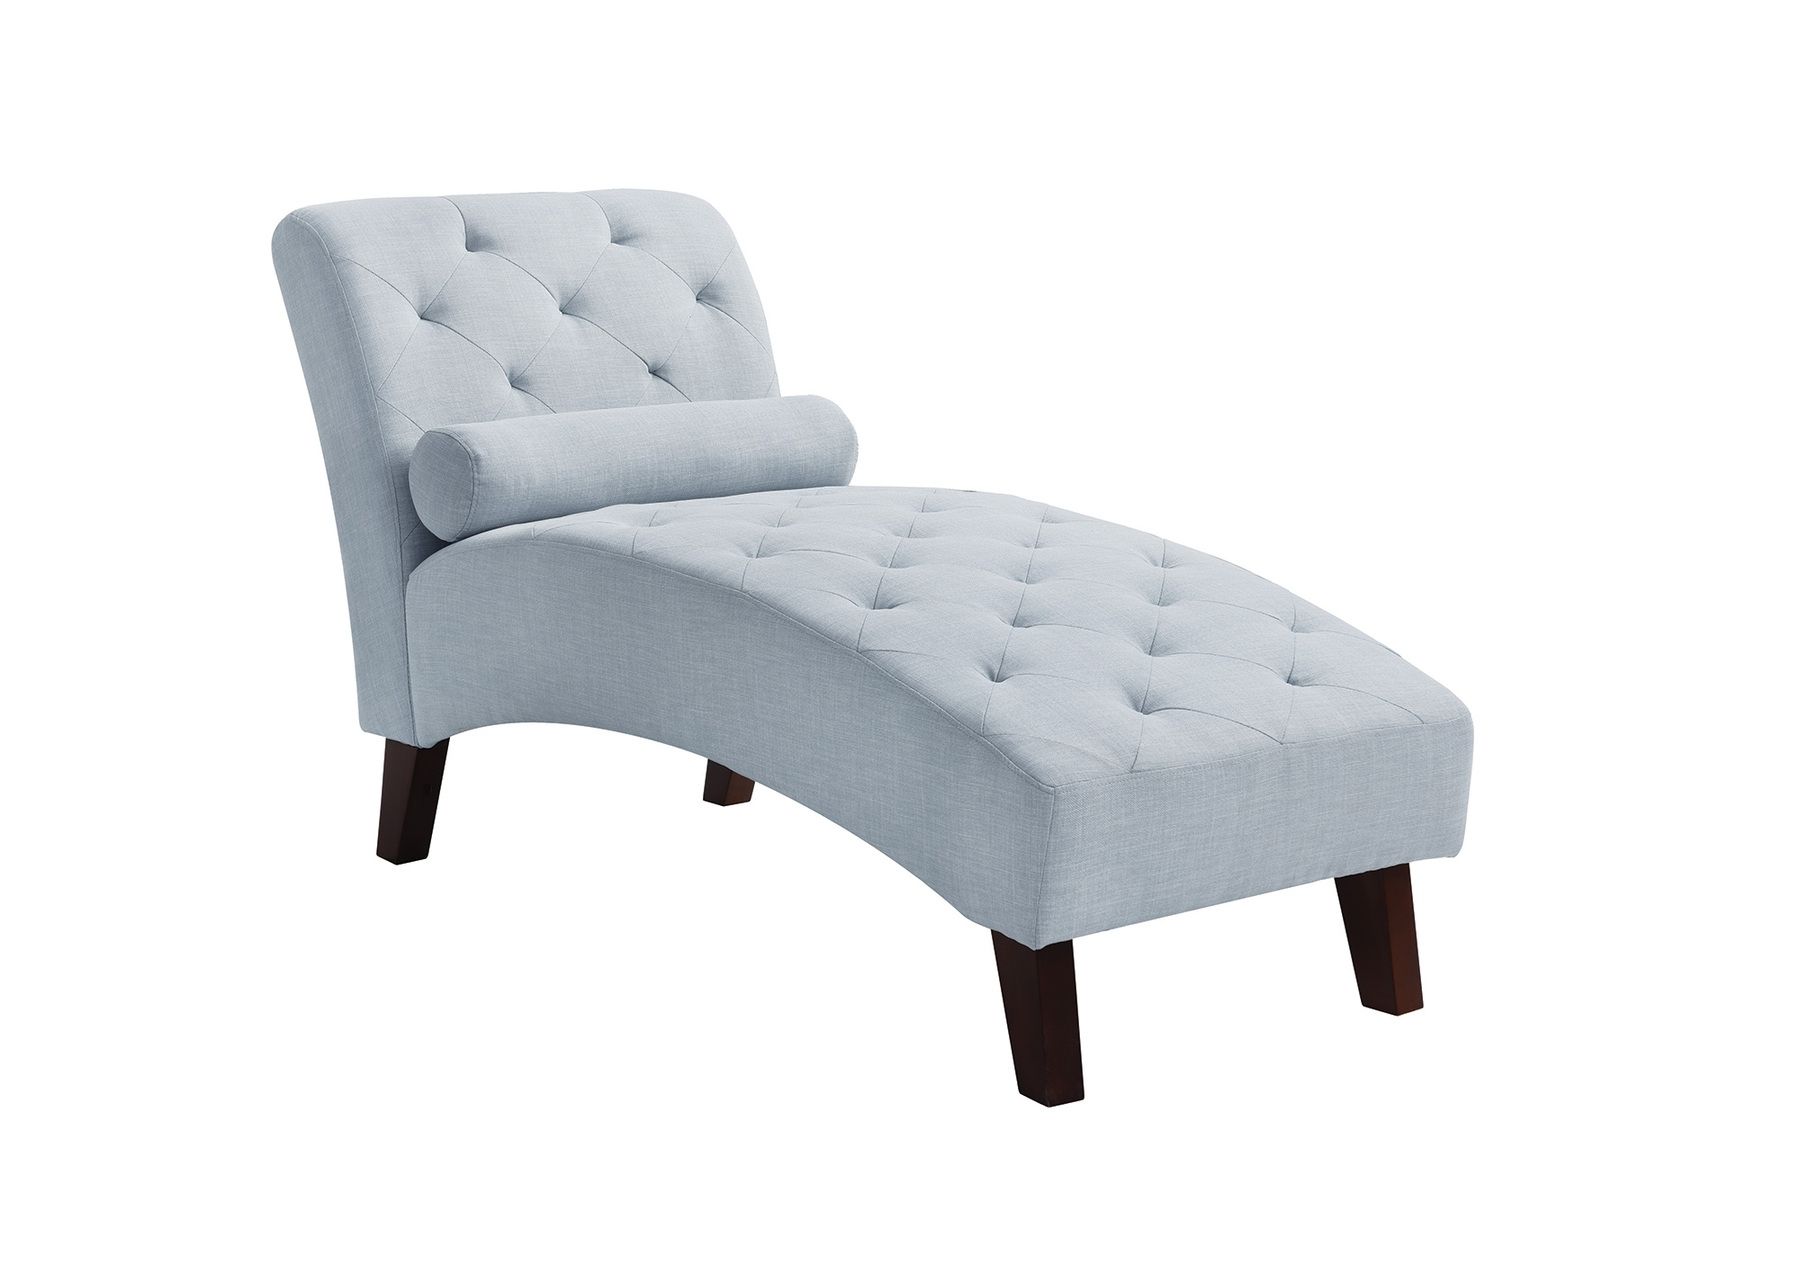 Current Newbury Light Blue Chaise G253 Glory Furniture Chaises, Lounge Pertaining To Blue Chaises (View 12 of 15)